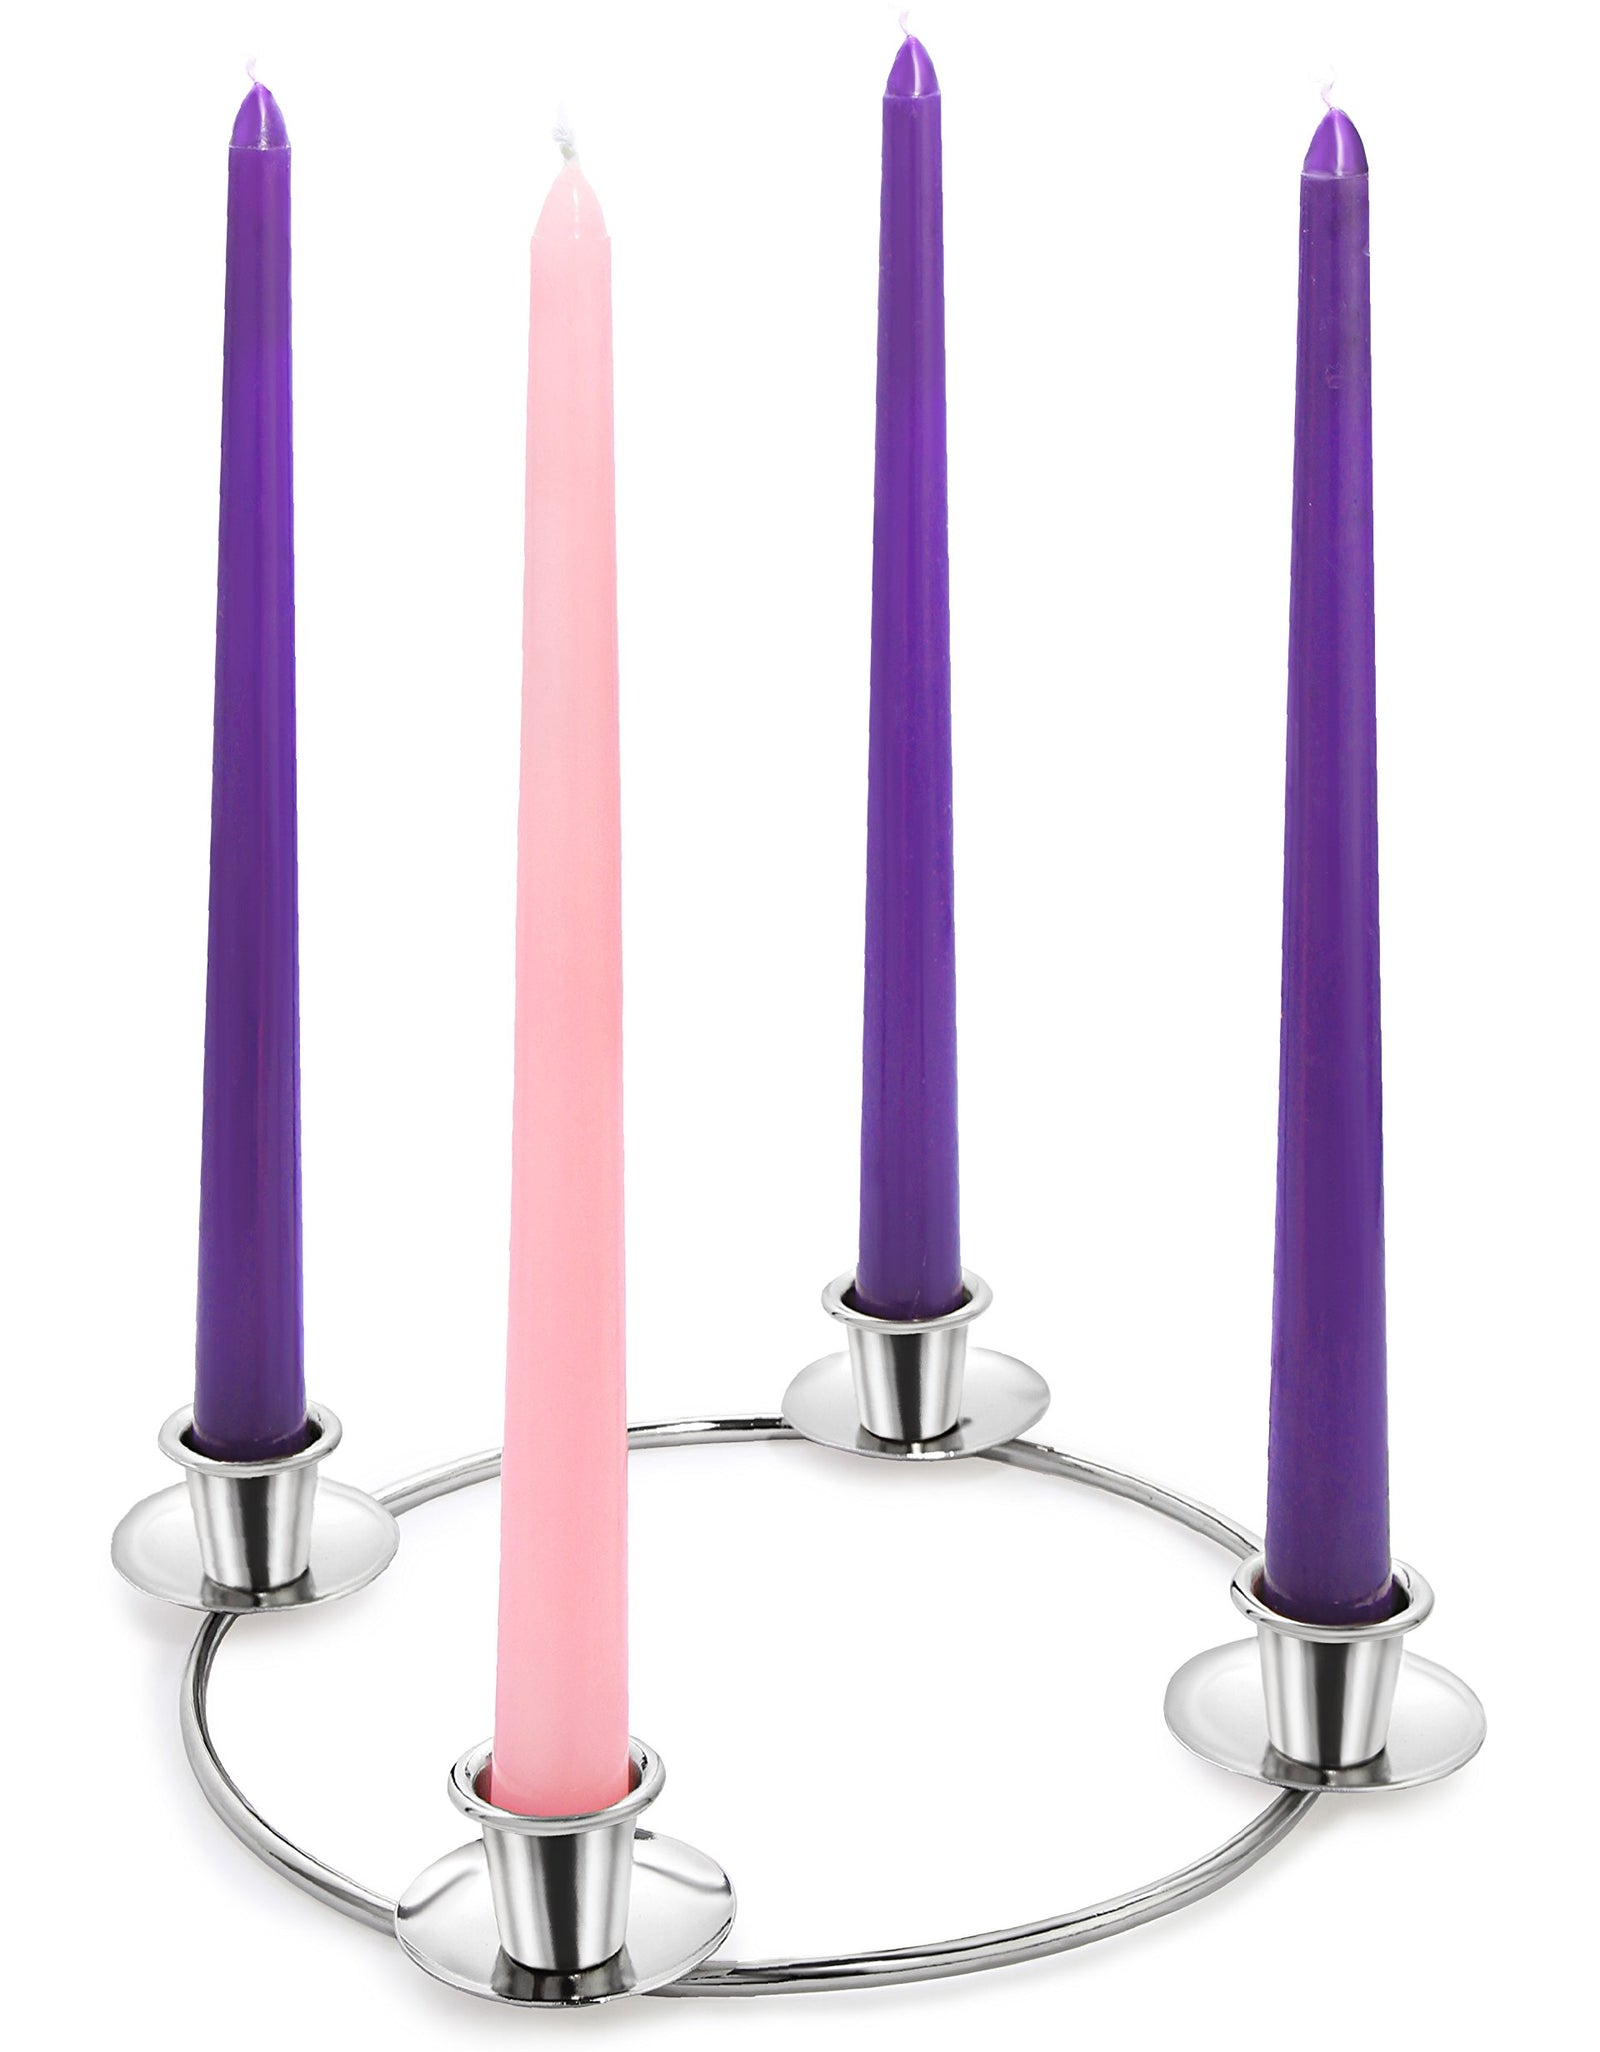 Advent Candle Set. "Made in the USA" Self Fitting End. Premium Hand Dipped Candles, Dripless, 4 pack - 3 purple, 1 pink